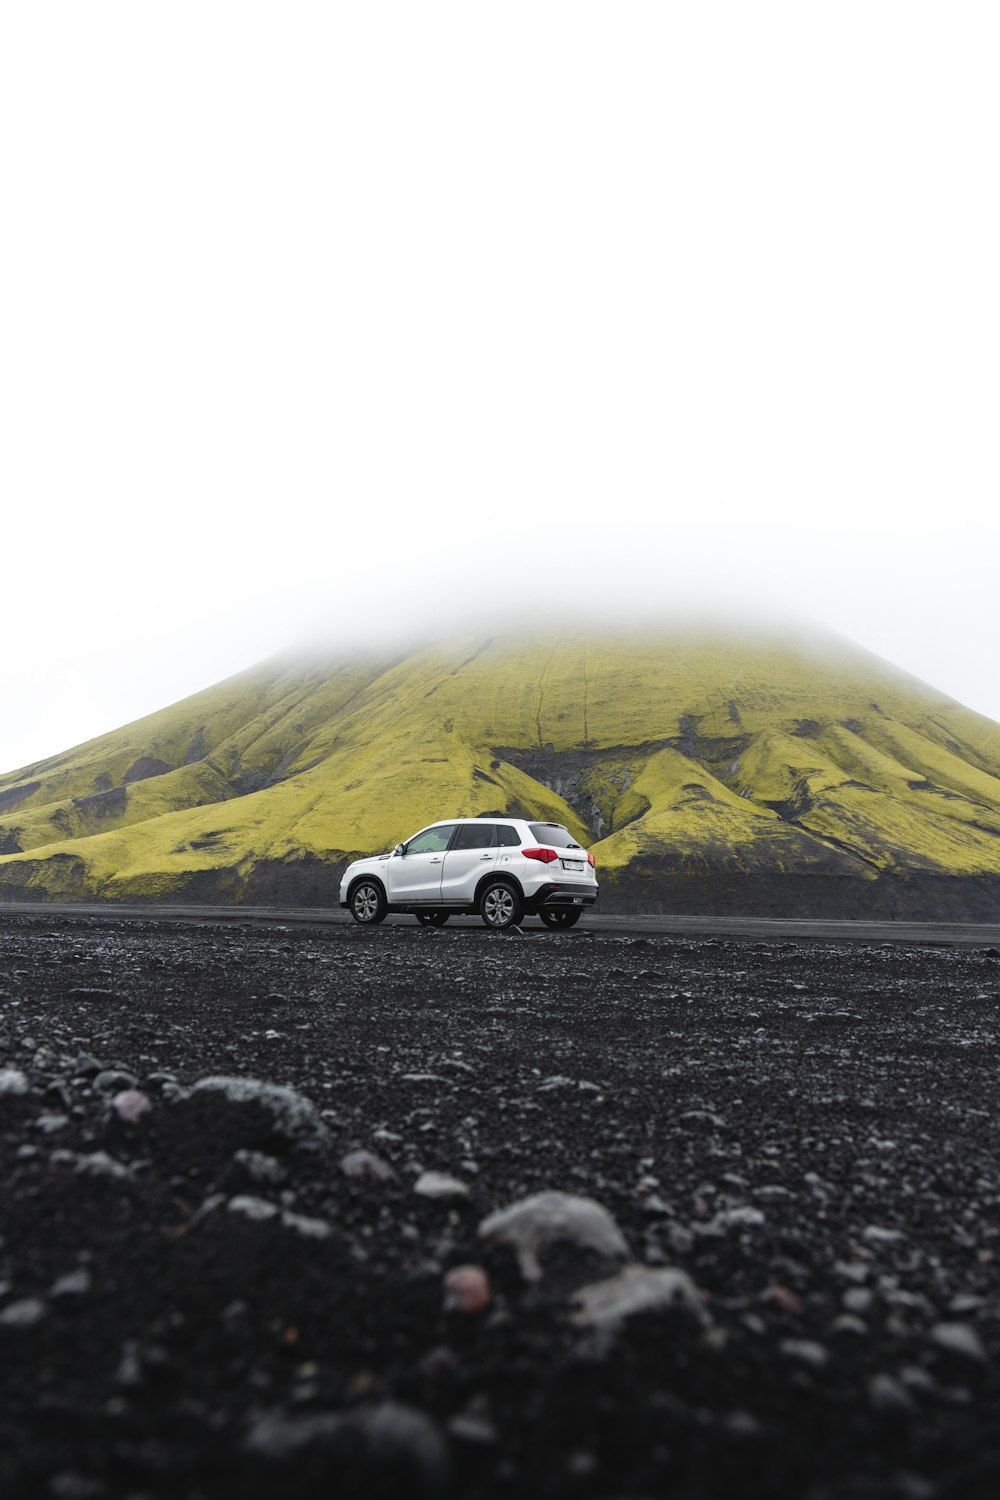 a car is parked in front of a mountain